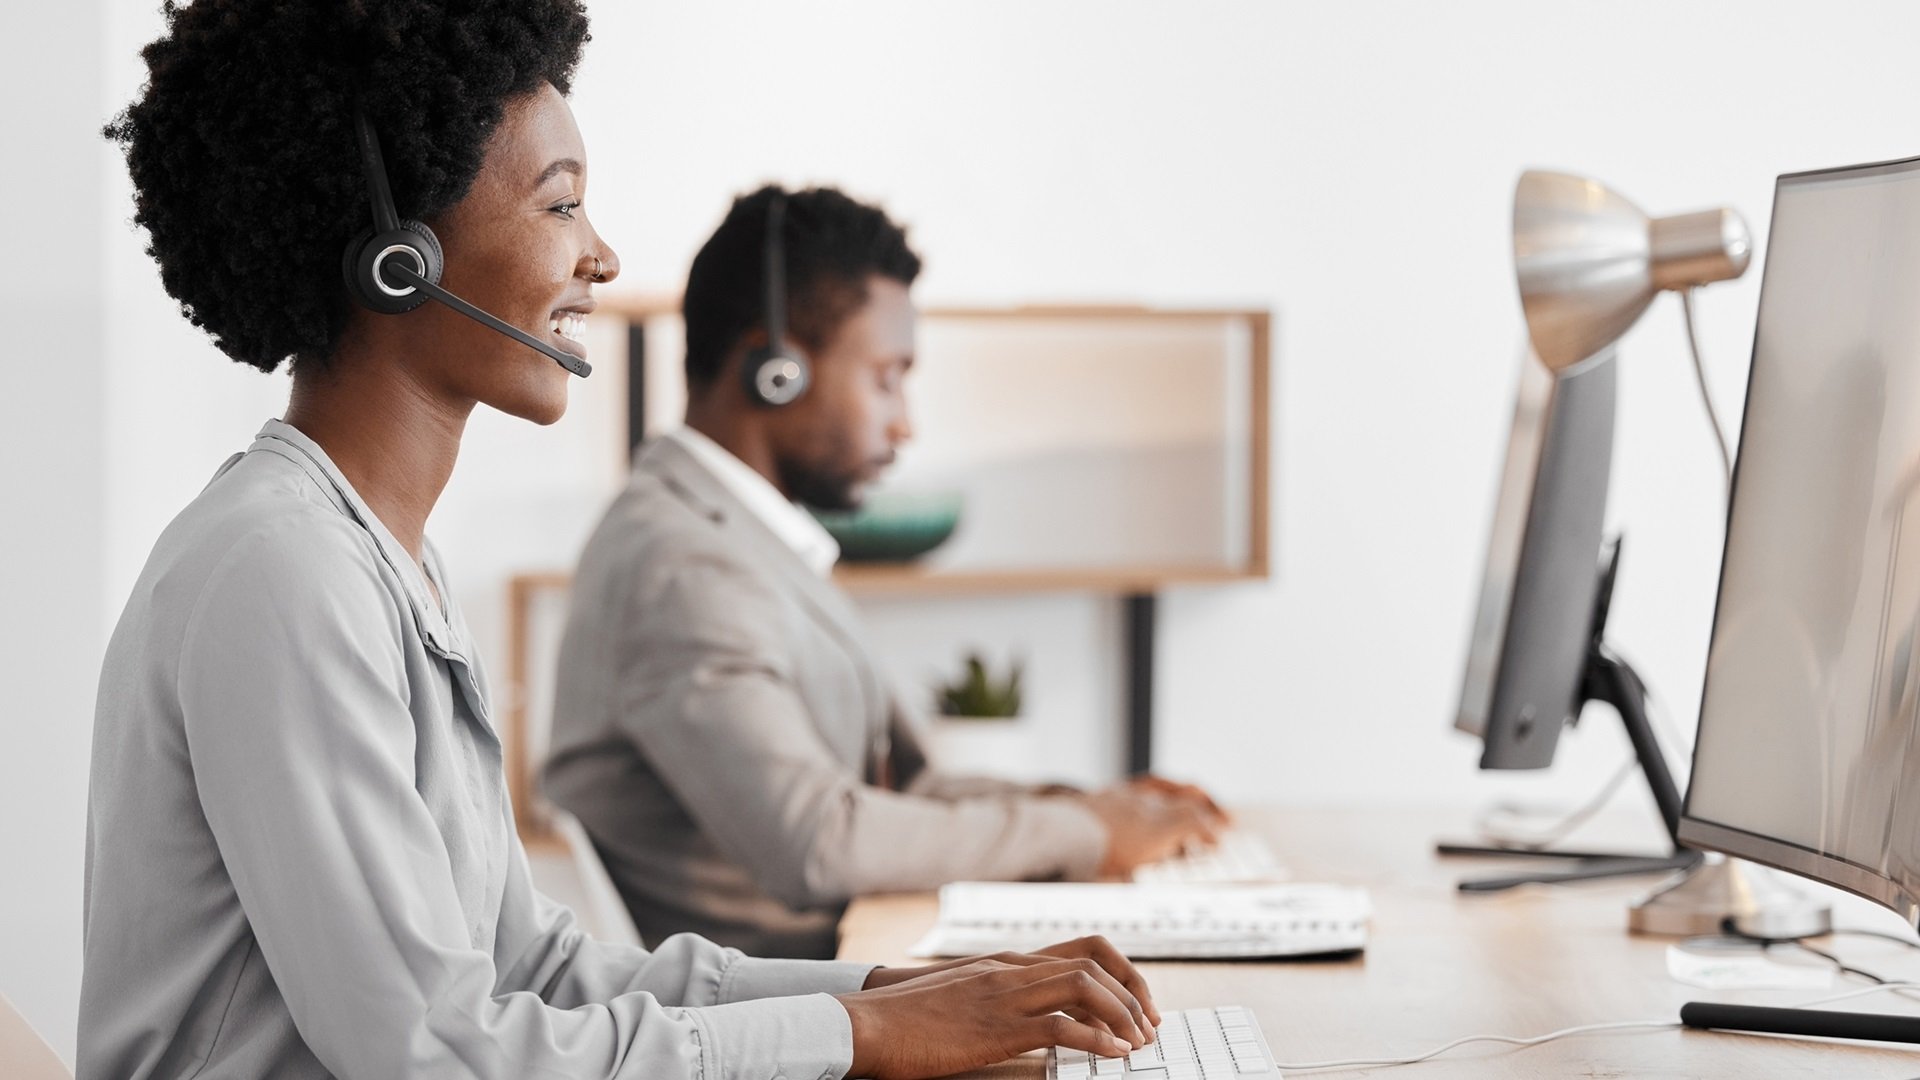 Defining Utilization and Occupancy in the Contact Center